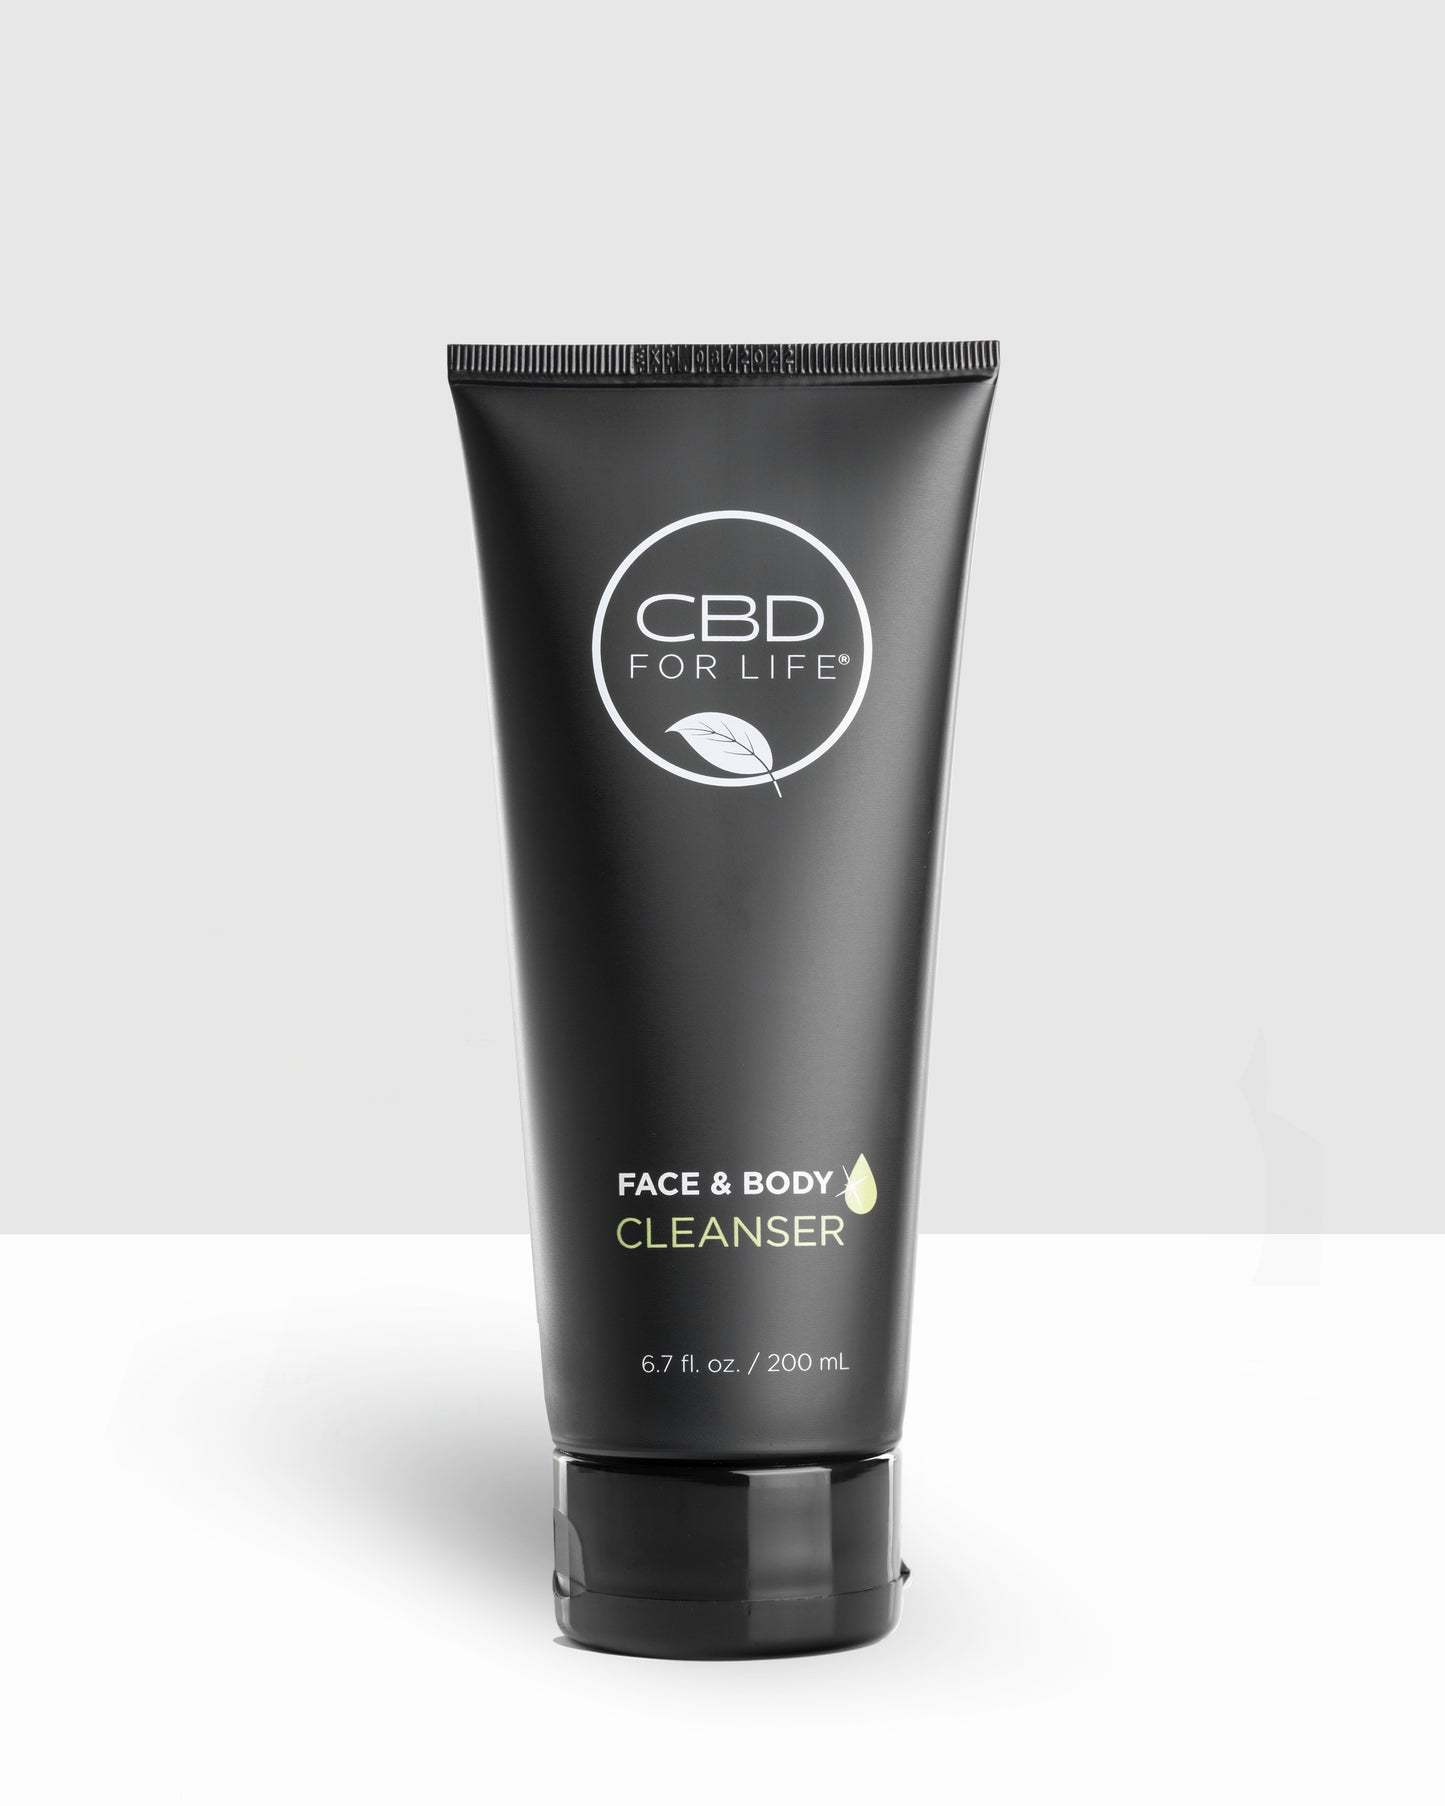 Dissolve dirt, oil and makeup with our multi-tasking, cream-to-foam CBD Face and Body Cleanser. A combination of phytonutrient-rich CBD, essential fatty acids and plant extracts deliver a deep, comfortable and skin-calming clean. Our CBD Face and Body Cleanser is the ultimate multi-tasker. Use our CBD face wash to cleanse your face, wash your body and as a shaving cream. Our CBD Face and Body Cleanser is extremely emollient and is gentle on the skin.